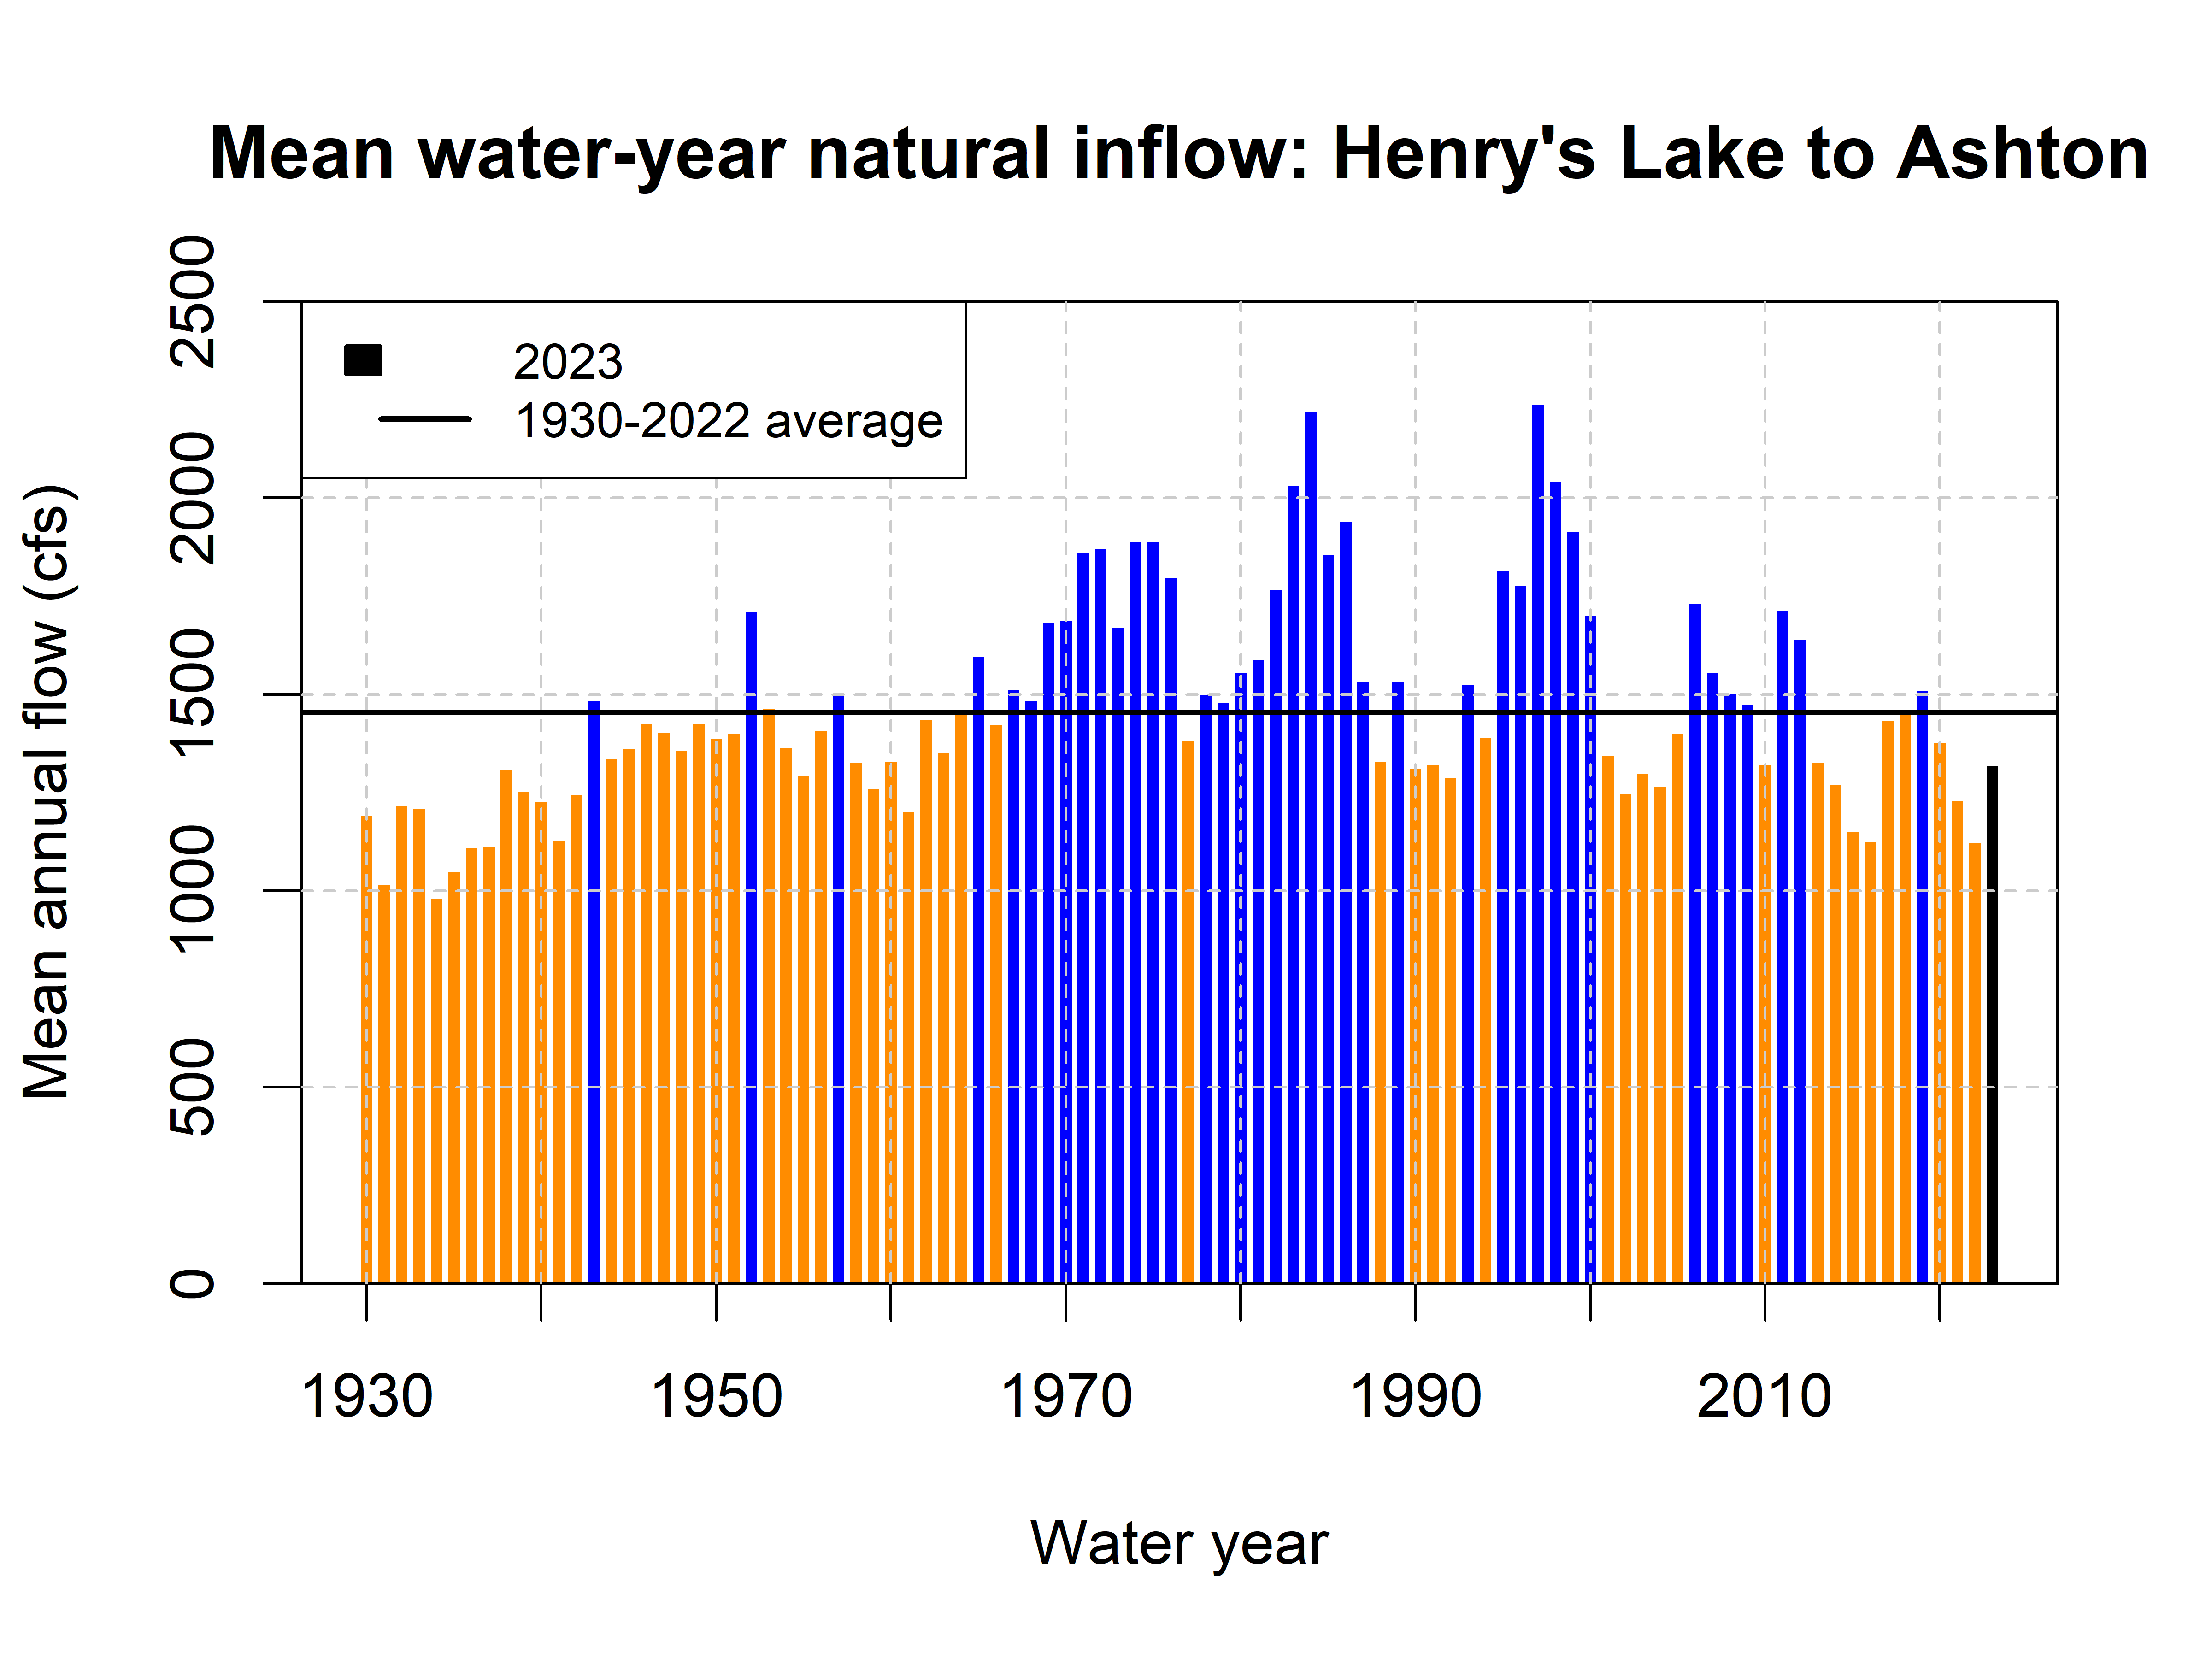 A graph showing mean water year natural inflow from 1930-2022 on the Henry's Fork River from Henry's Lake to Ashton, Idaho.